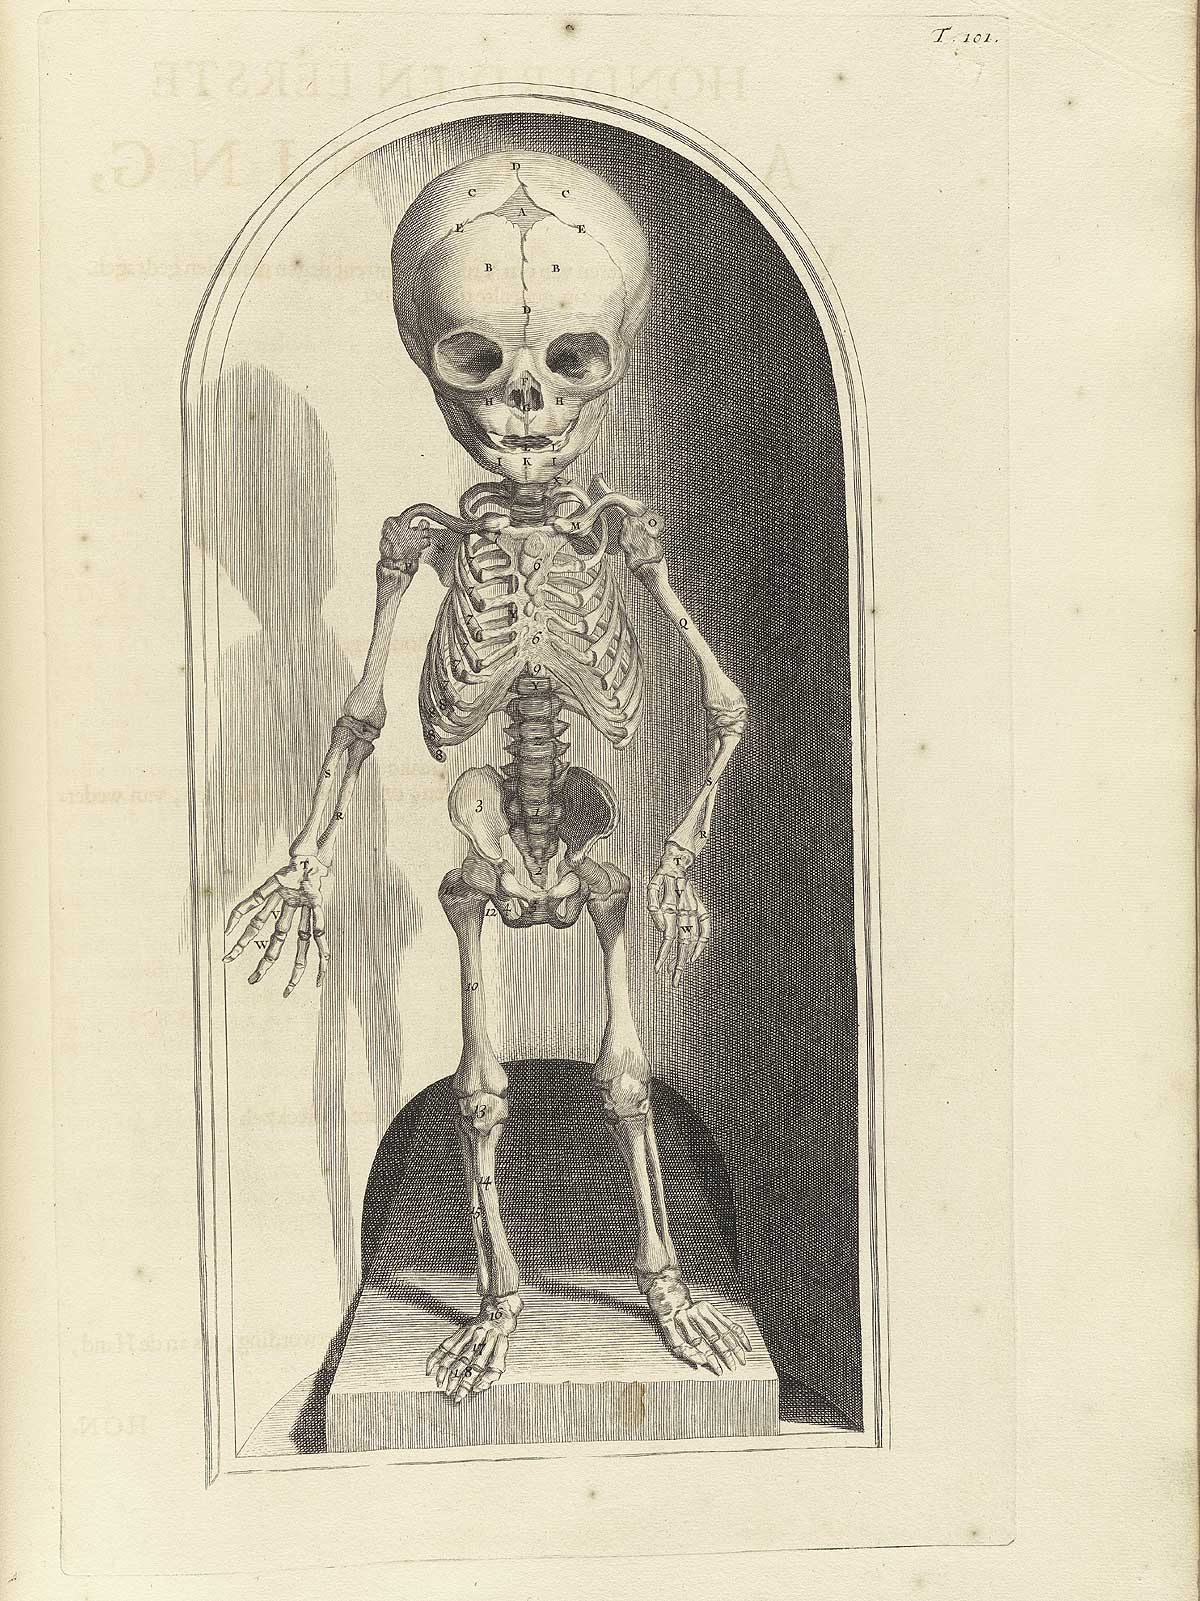 Engraving of a full facing fetal skeleton standing on a wooden plank in an alcove with a rounded top; from Govard Bidloo’s Ontleding Des Menschelyken Lichaams, Amsterdam, 1690, NLM Call no. WZ 250 B5855anDu 1690.